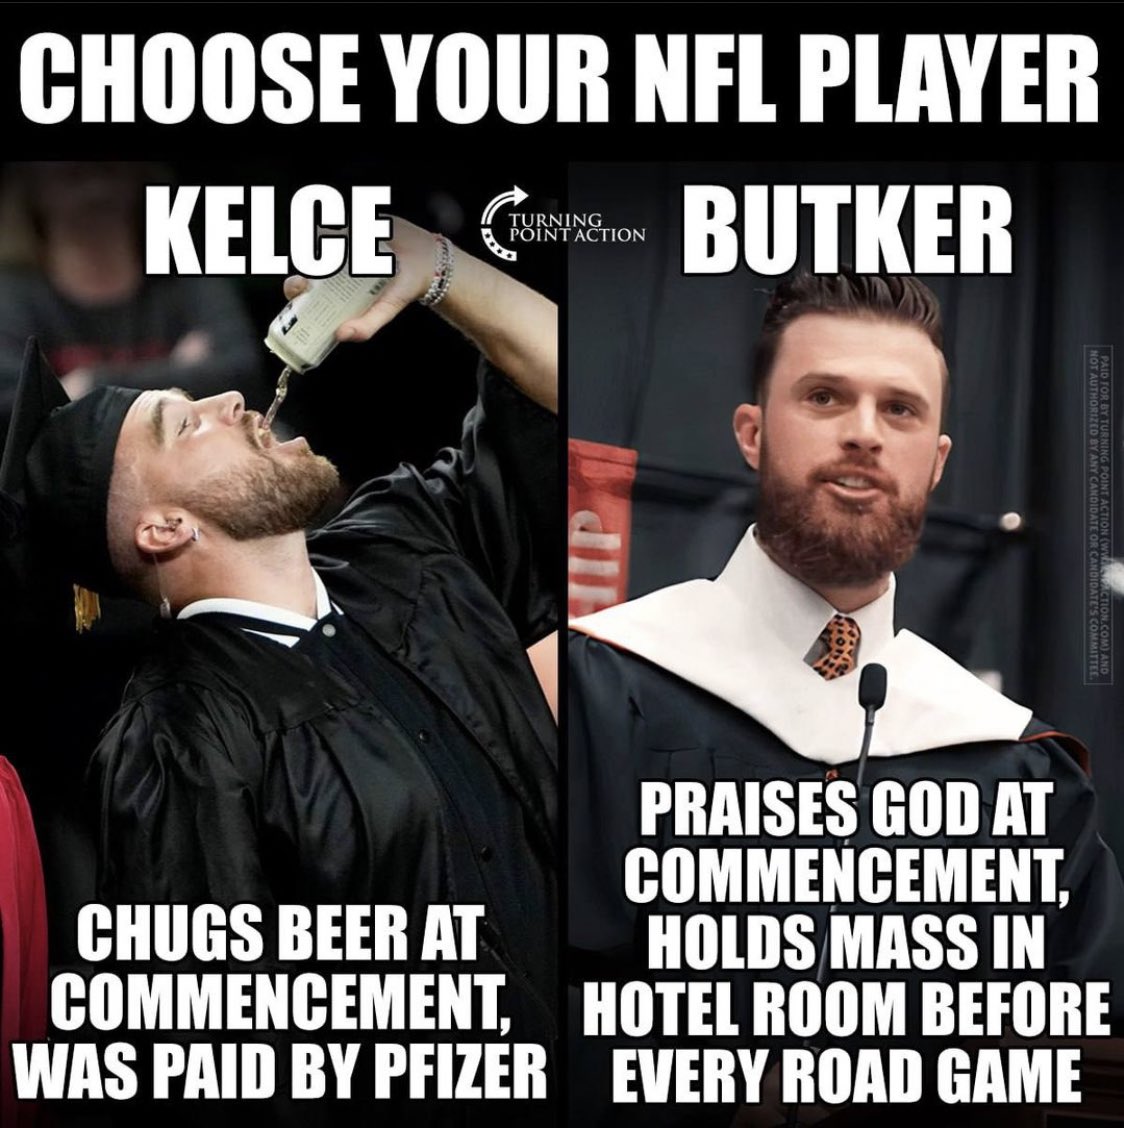 Harrison Butker hands down! 

Can’t understand the outrage
over a man speaking about traditional catholic values to a catholic audience at a catholic college. 🙄